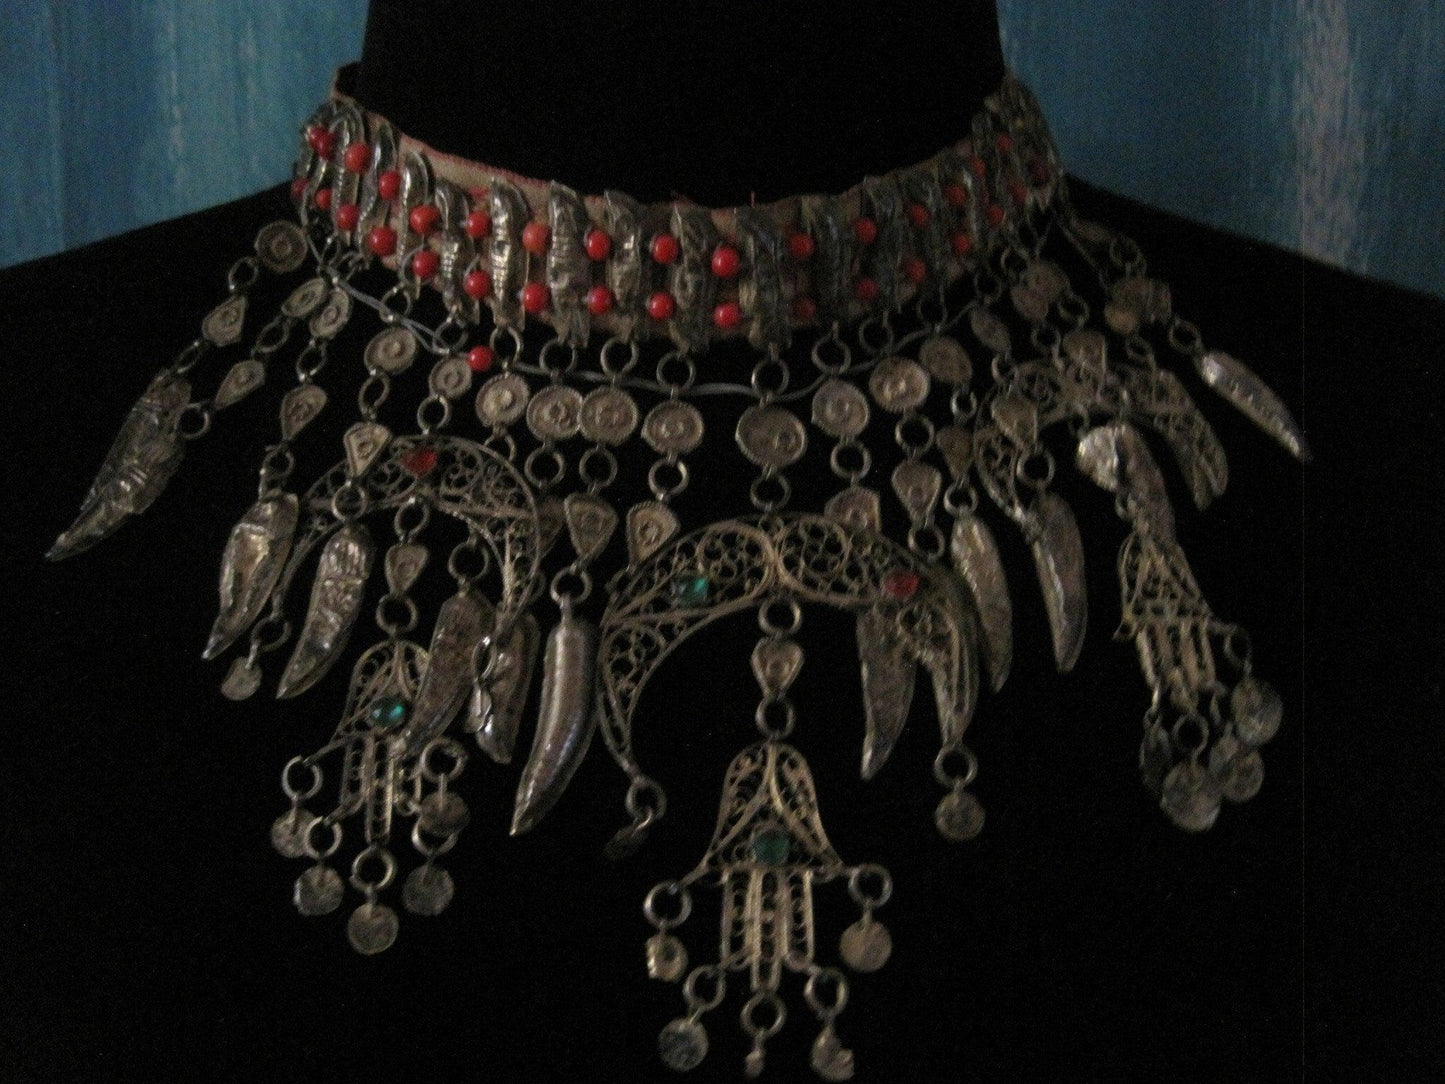 Antique Berber Gold Gilt Silver Choker Bib Necklace with Crescent Moons and Hands of Fatima - Anteeka